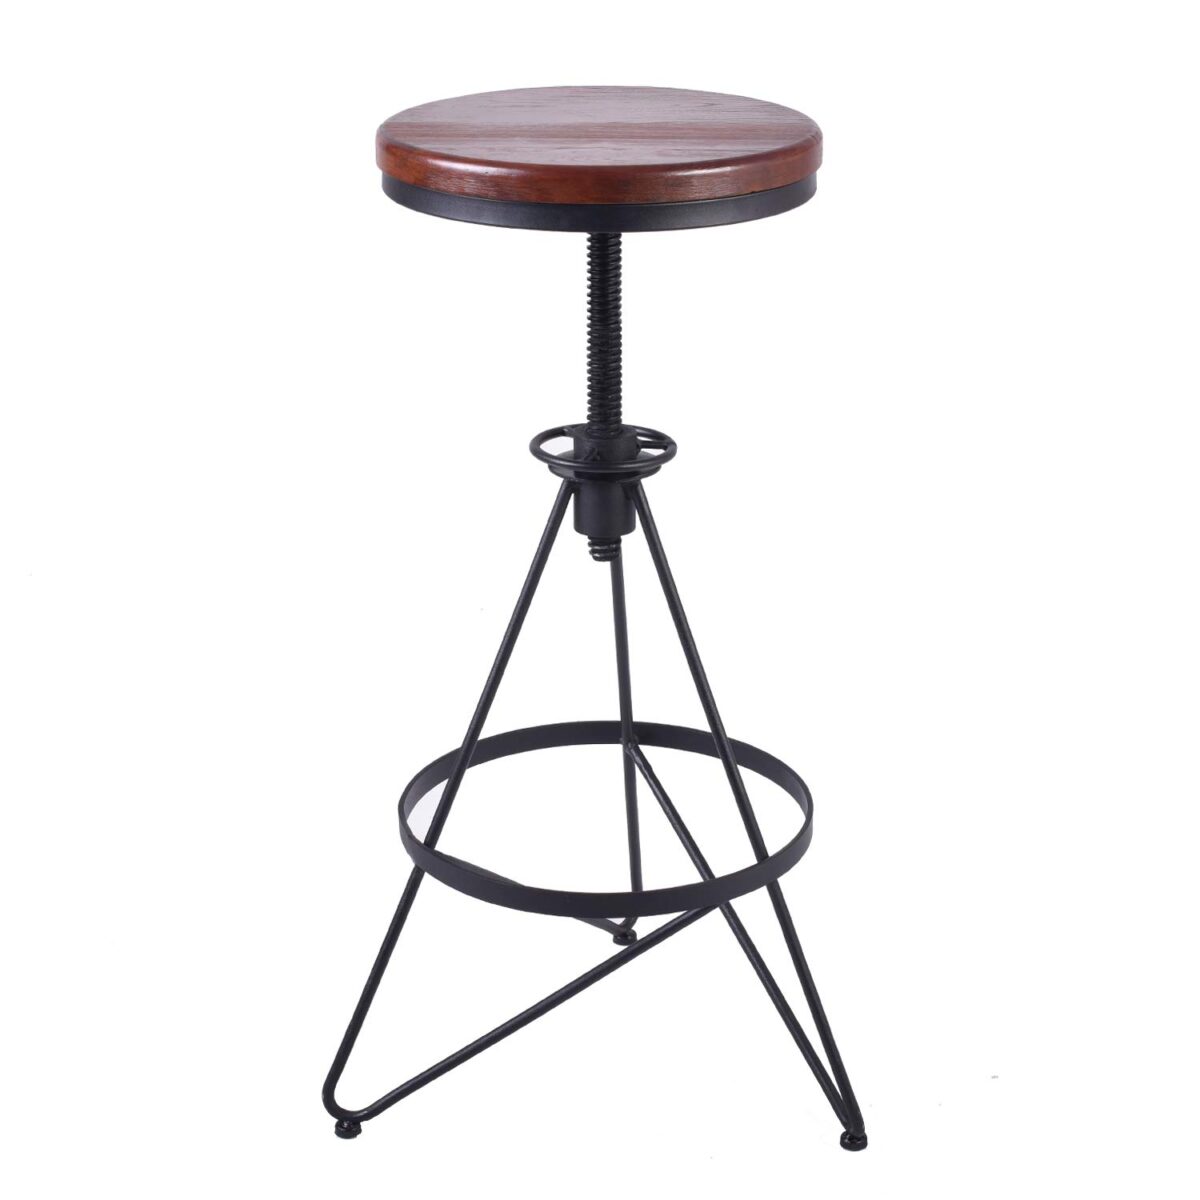 Industrial Style Vintage Bar Stool Product Image